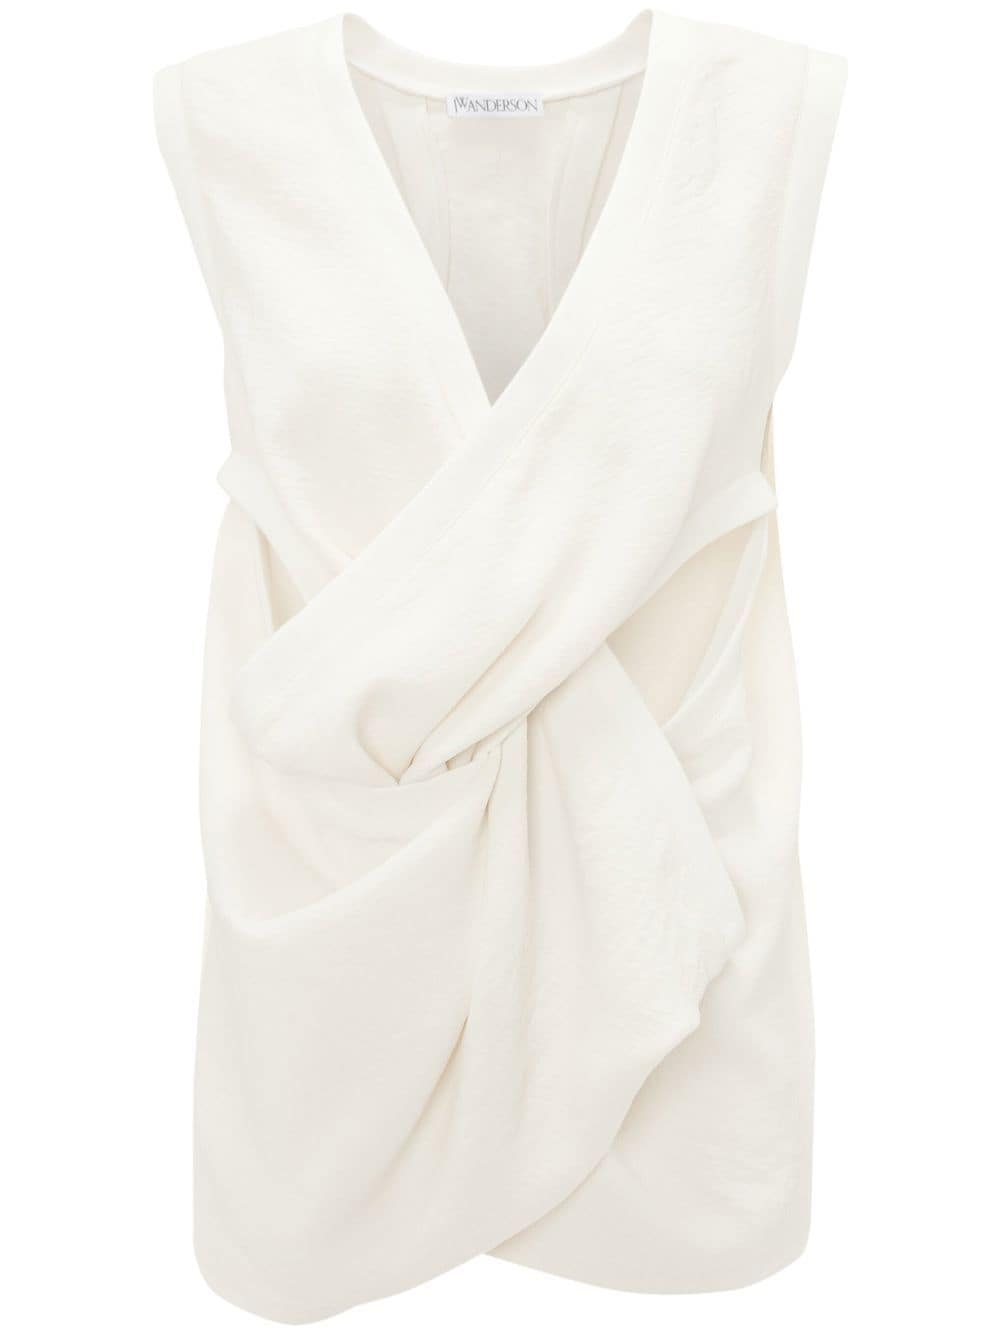 JW Anderson twist-front sleeveless top - White